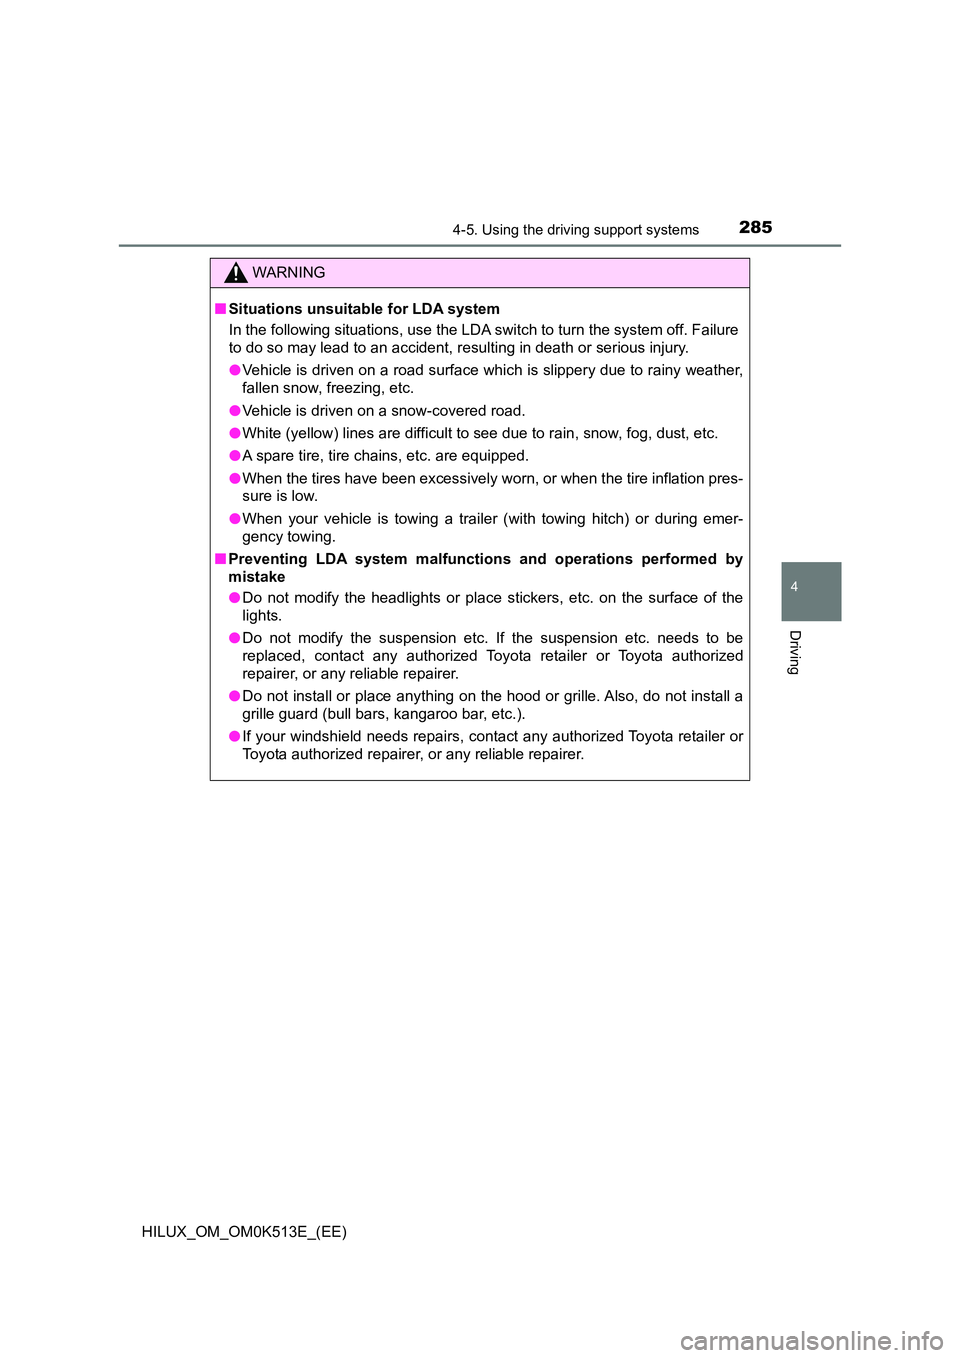 TOYOTA HILUX 2021  Owners Manual (in English) 2854-5. Using the driving support systems
4
Driving
HILUX_OM_OM0K513E_(EE)
WARNING
�QSituations unsuitable for LDA system 
In the following situations, use the LDA switch to turn the system off. Failu